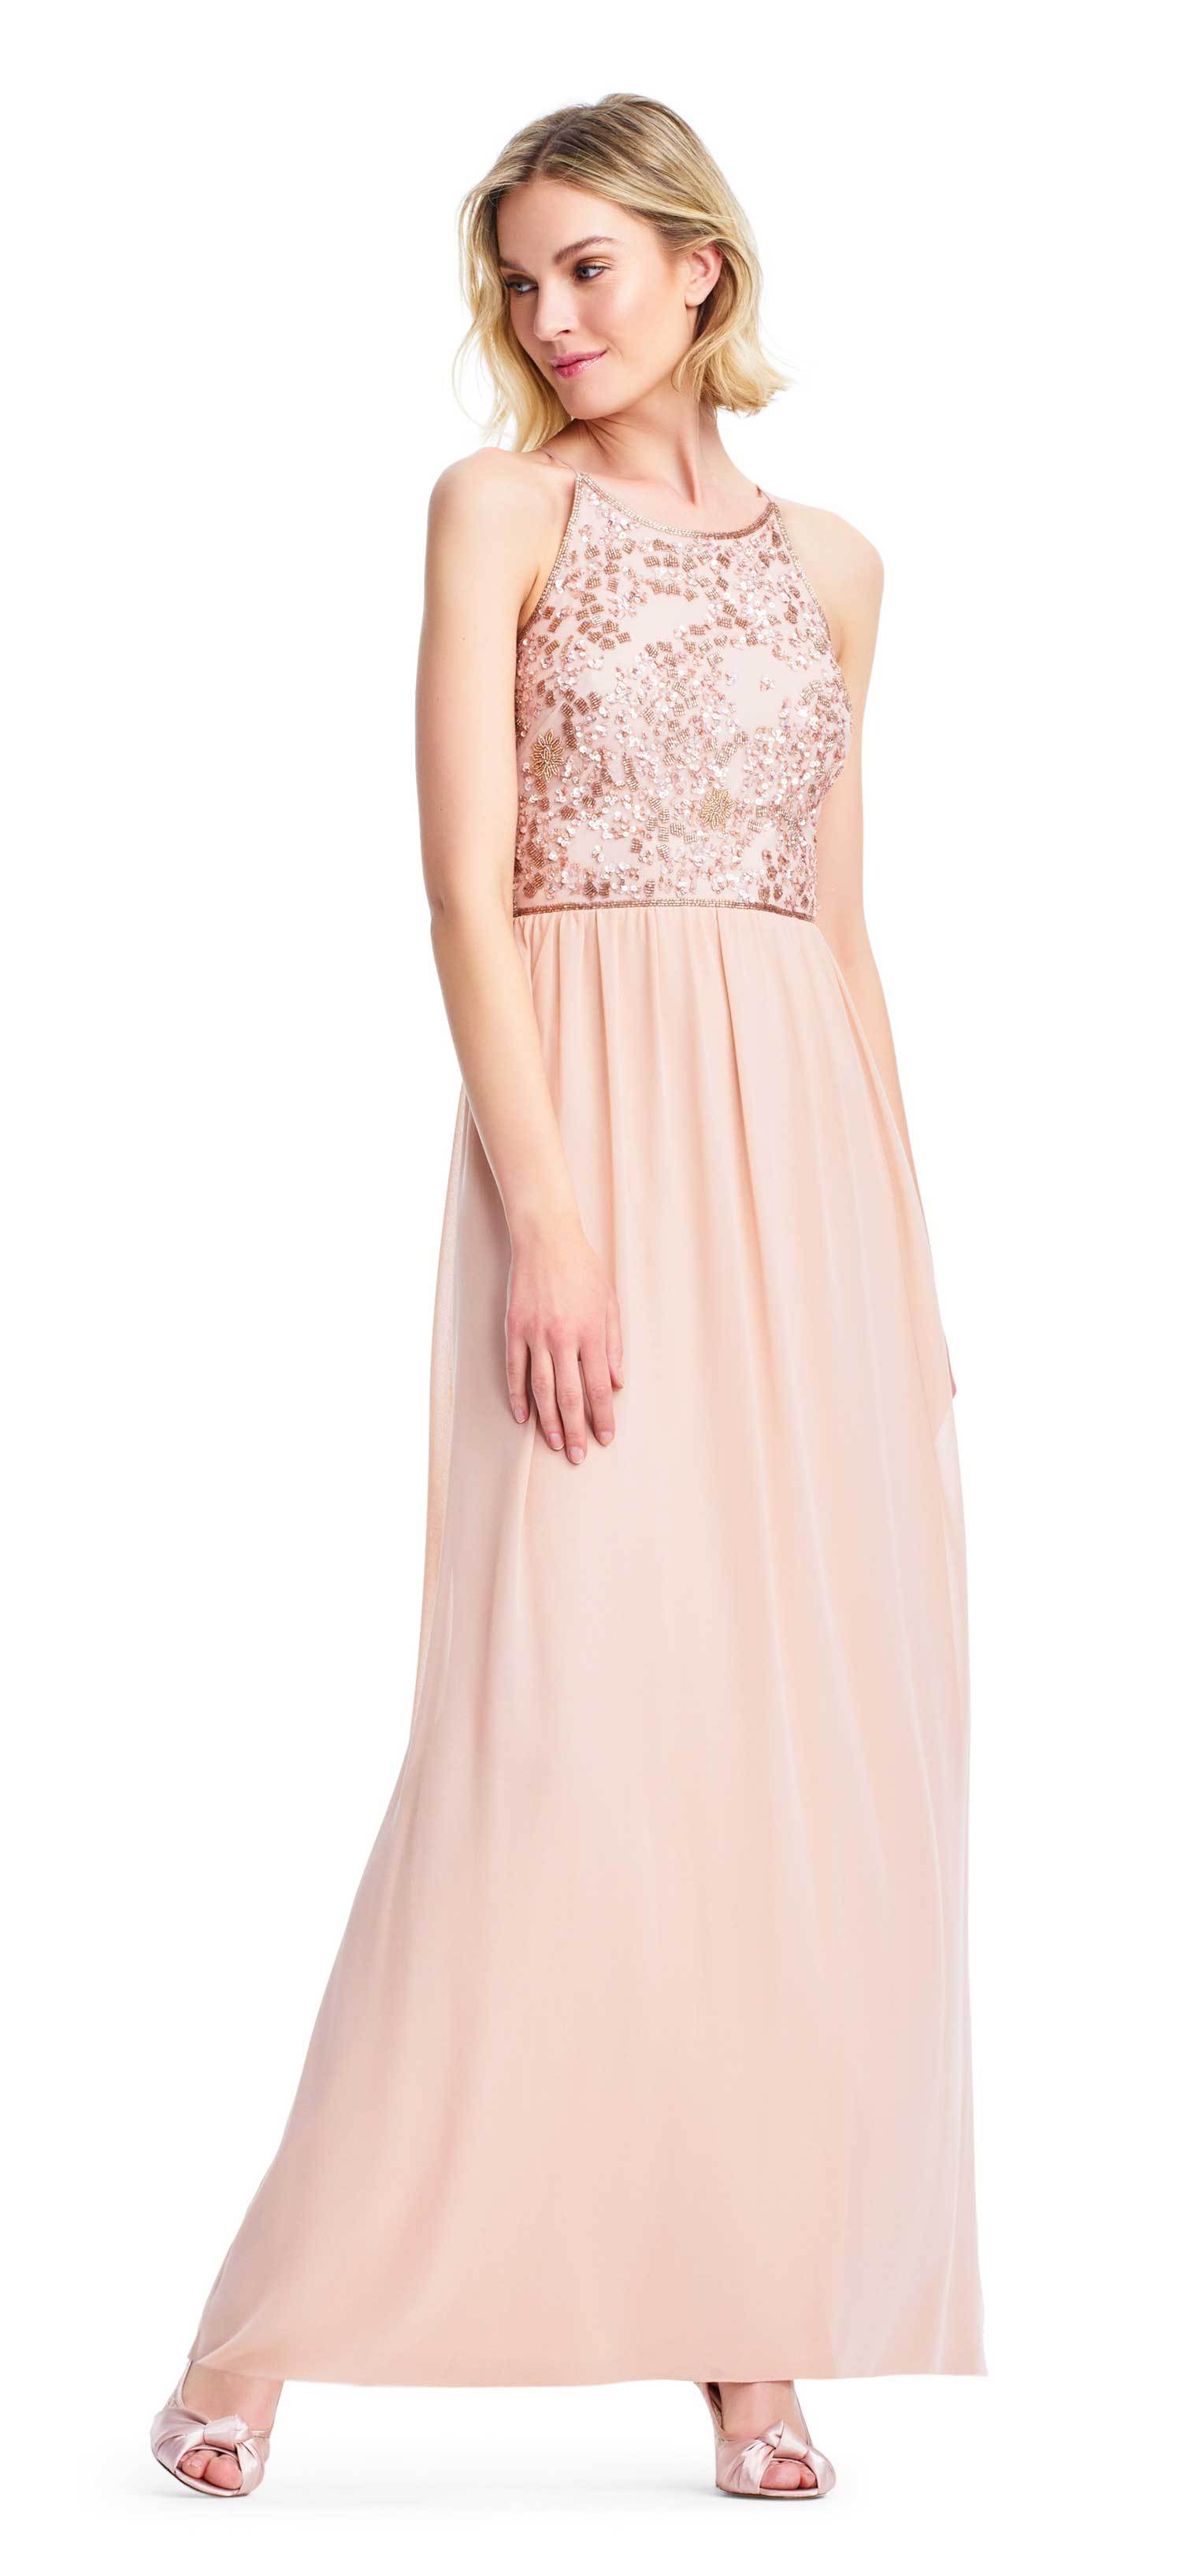 Image of Adrianna Papell - AP1E203111 Bedazzled Halter Chiffon A-line Dress